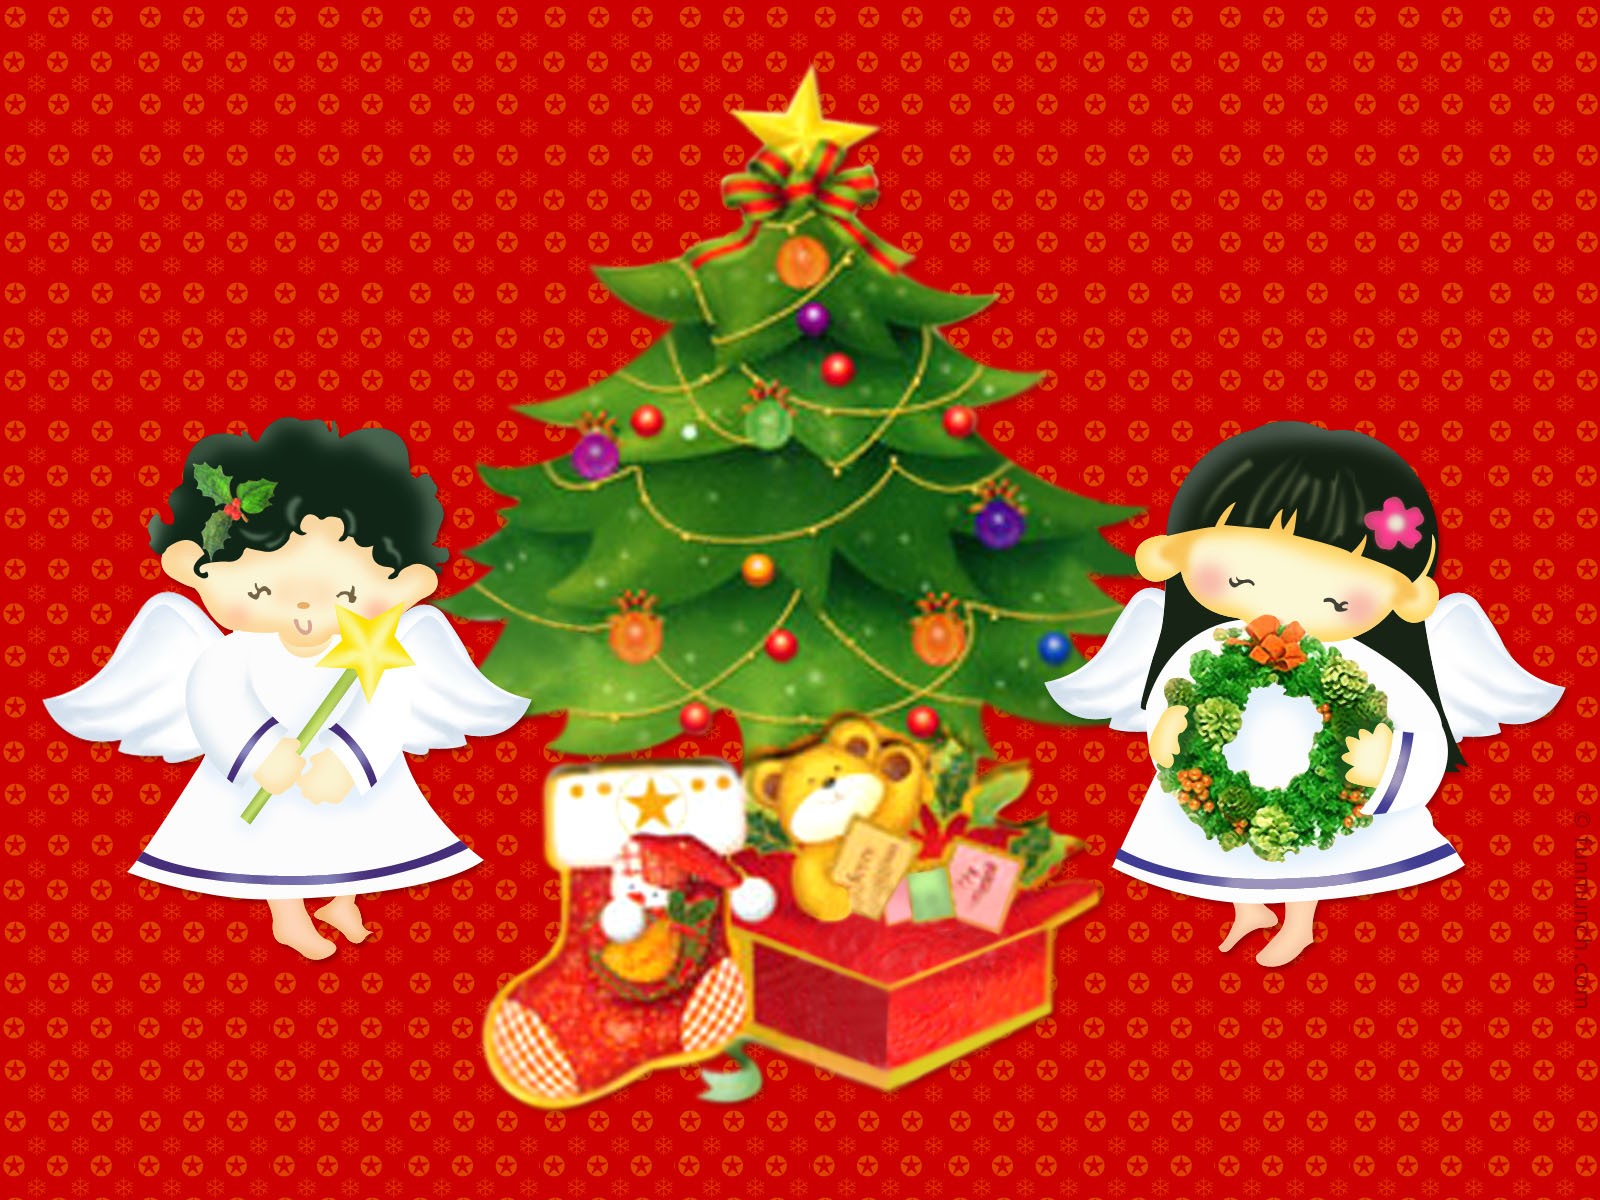 Angels And Christmas Tree Wallpaper - Christmas Wallpaper Backgrounds - HD Wallpaper 